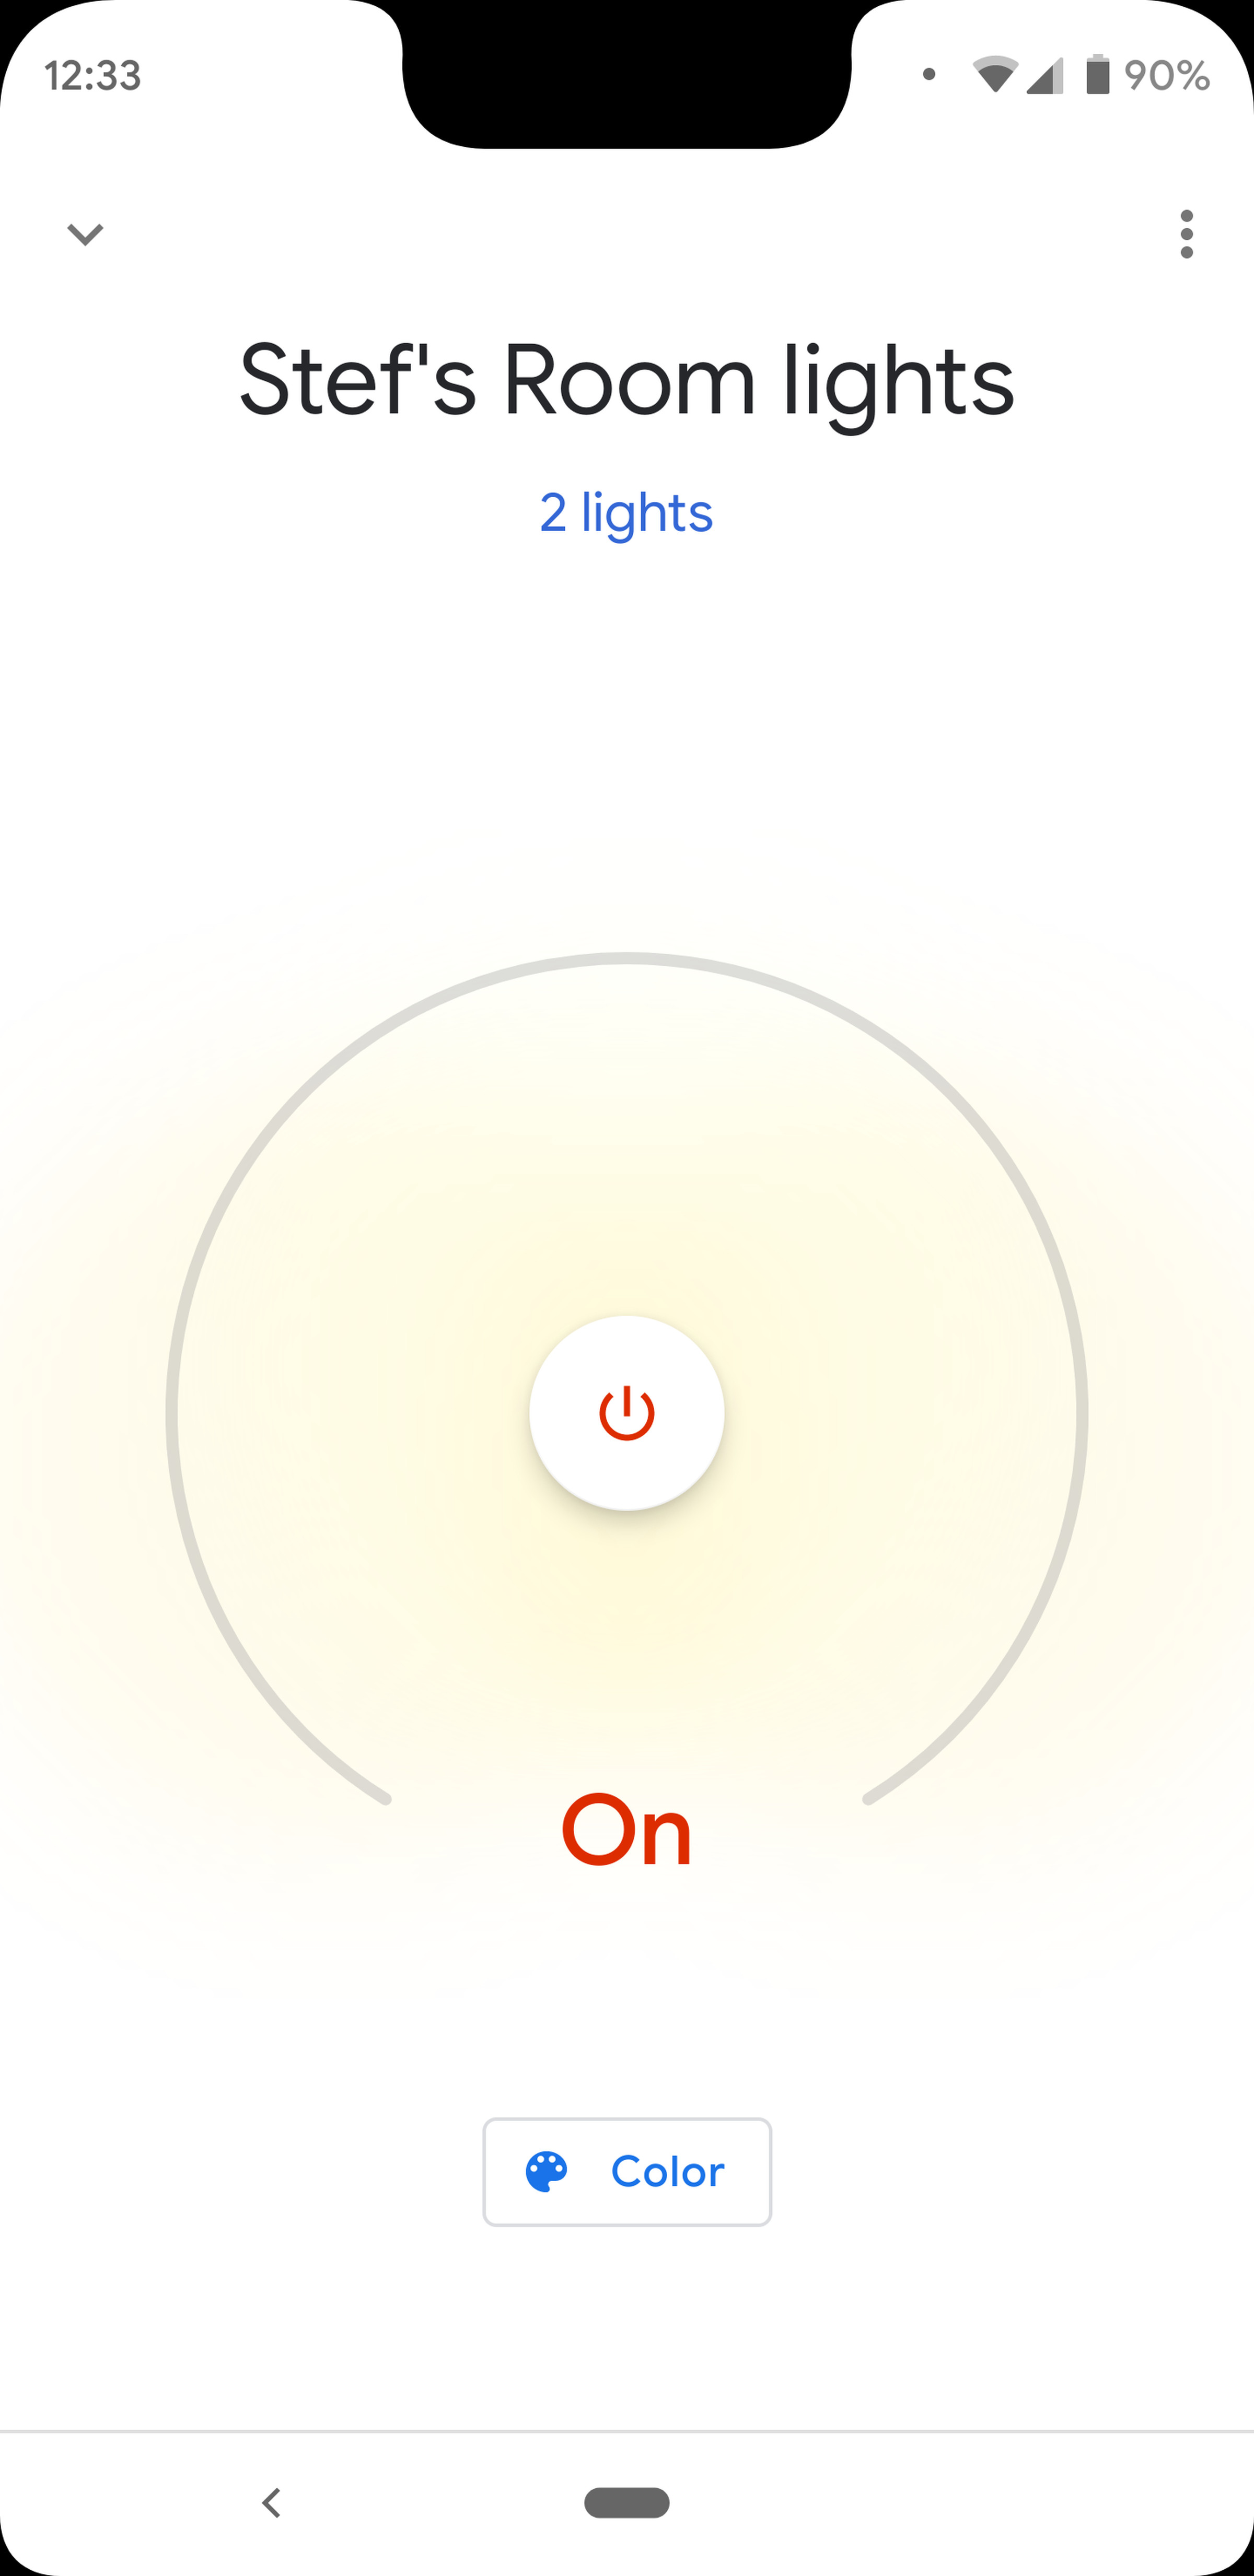 From here, you can control brightness, select specific lights, and set colors. 